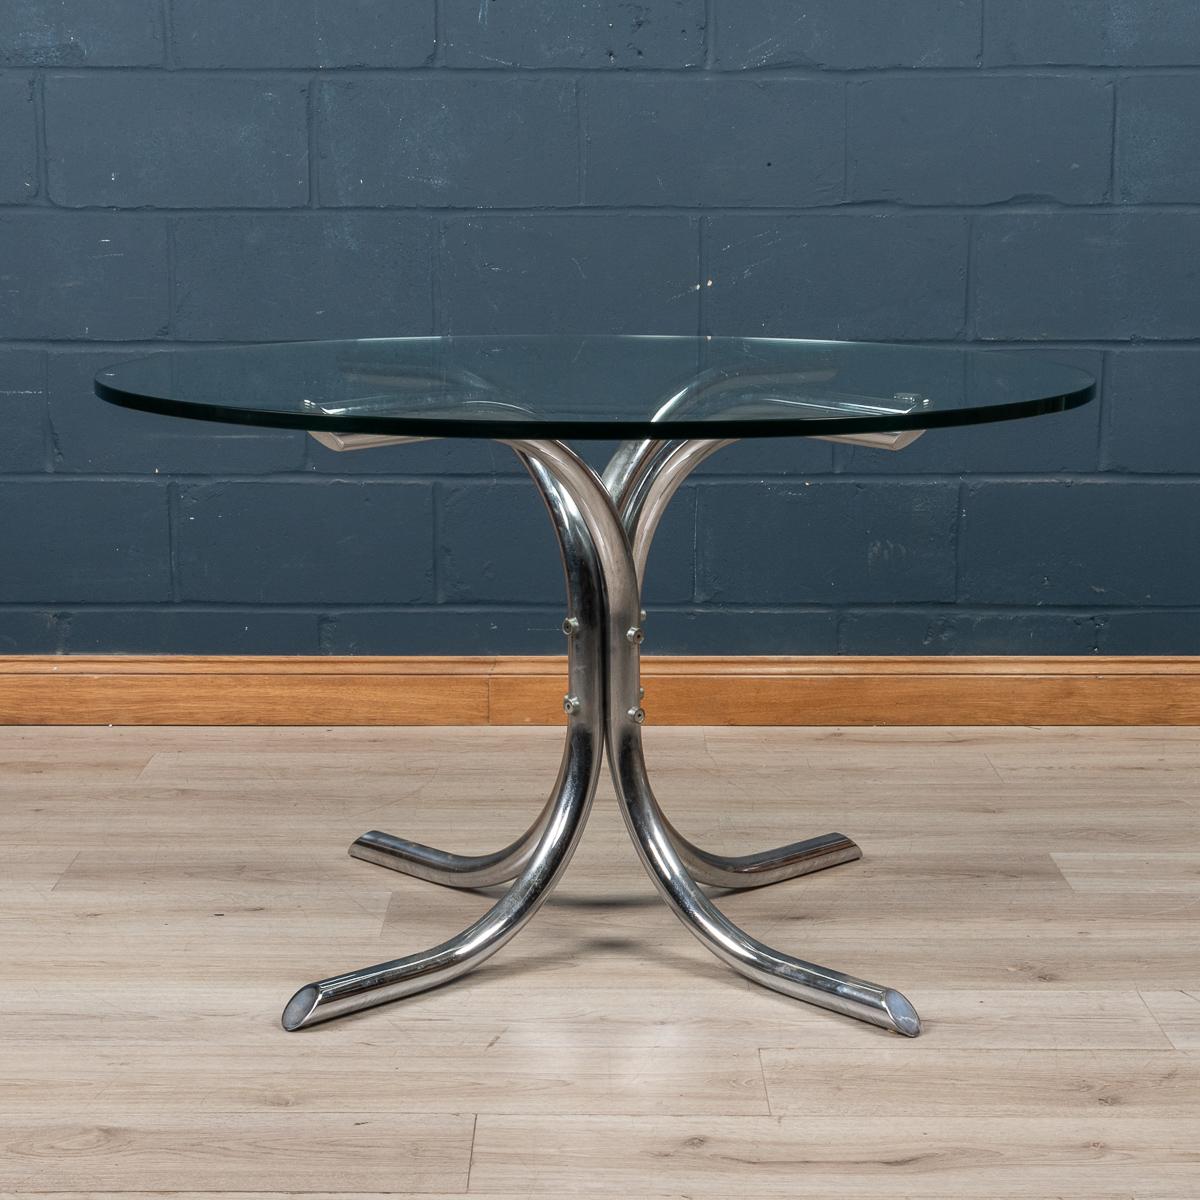 An elegant dining table designed and made in Italy around the 1970's. Blending industrial design with art, the tubular structure supports a thick circular glass, 120cm in diameter. A lovely piece of mid century industrial design perfect for any home